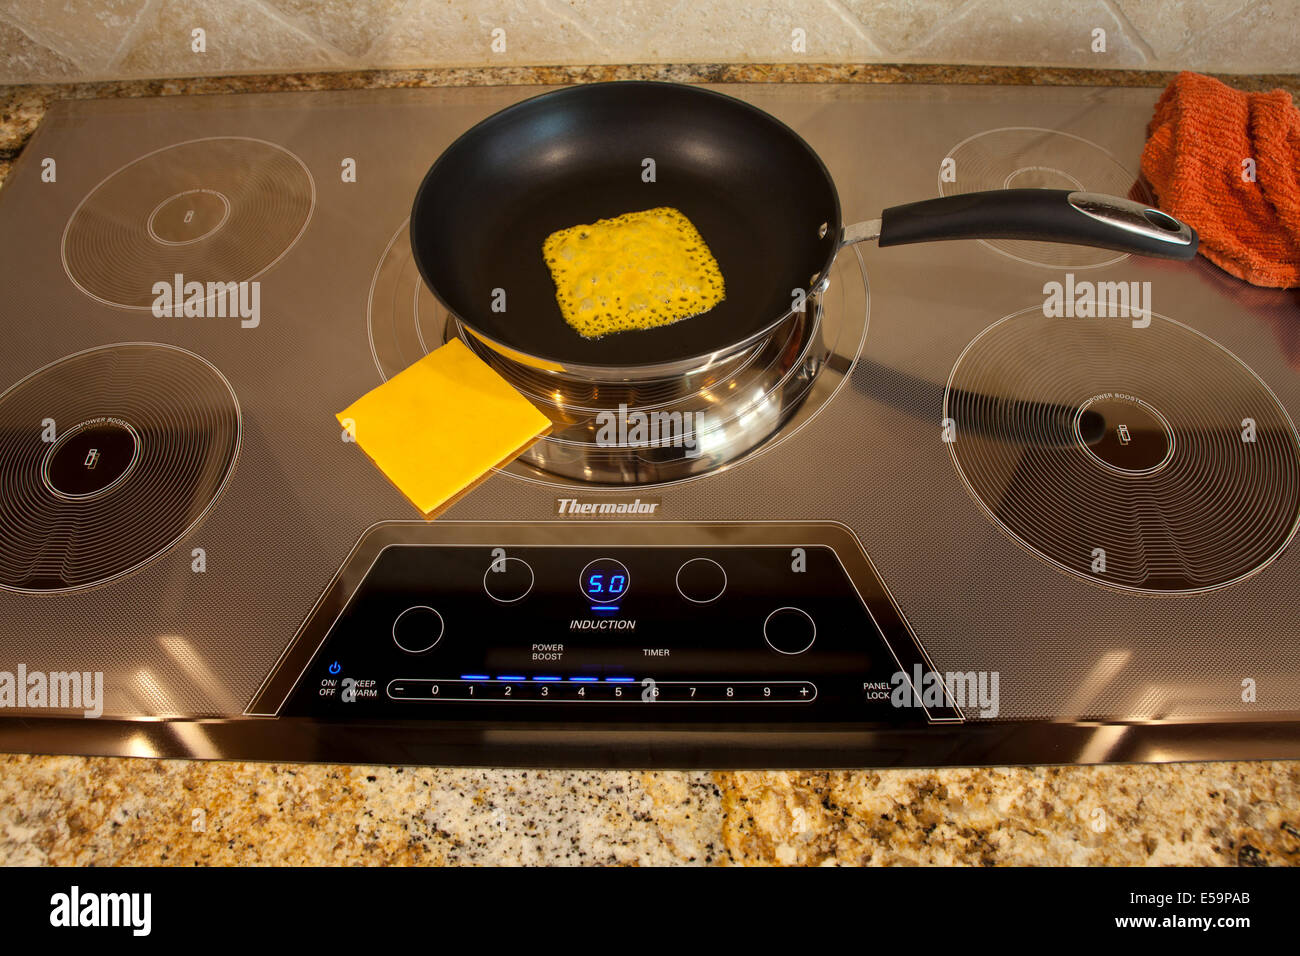 magnetic energy of Thermador Induction cooktop with melting cheese  Series of 4 images. MR  © Myrleen Pearson Stock Photo